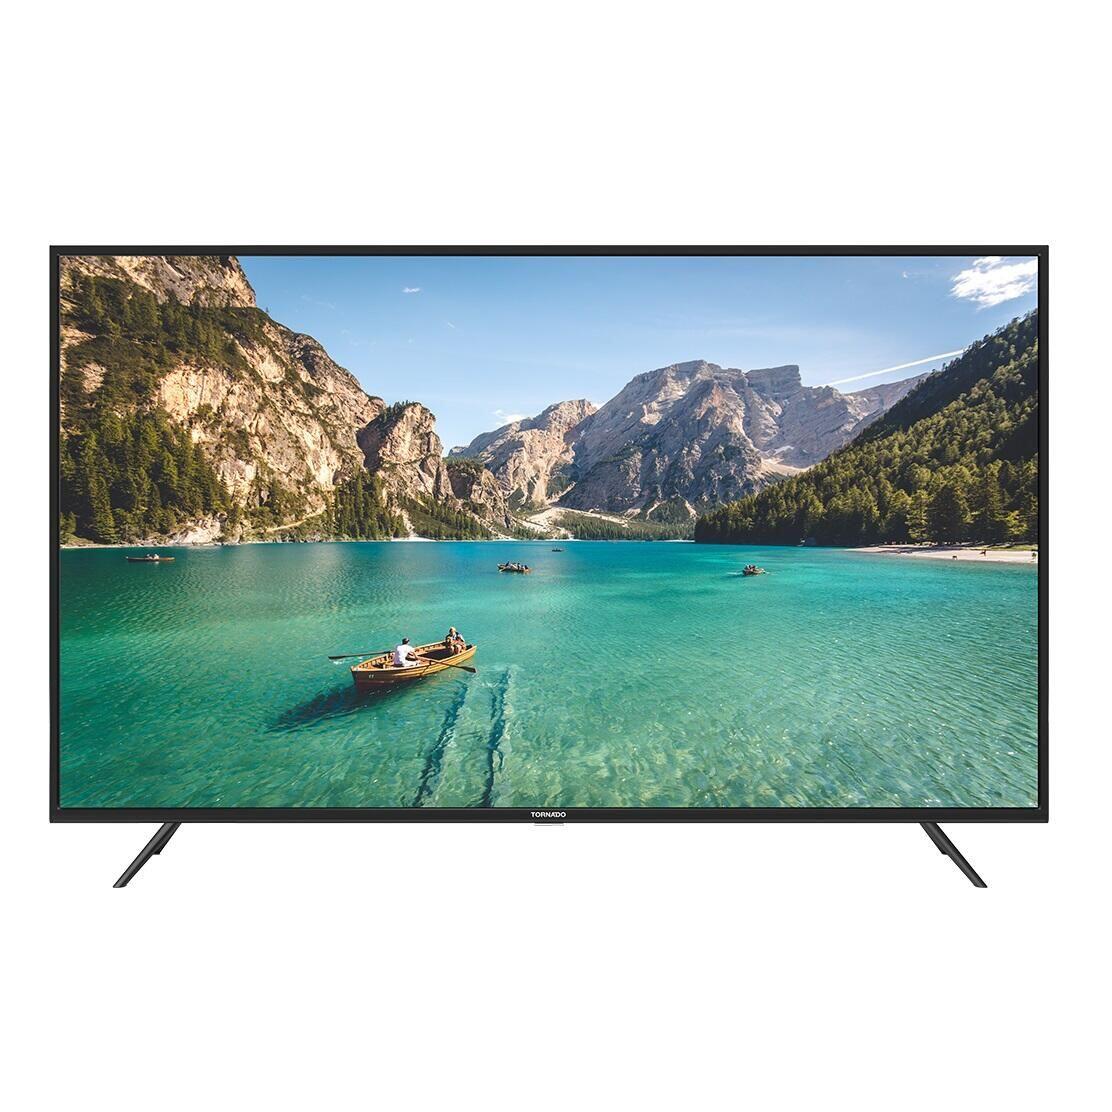 Tornado 58 Inch 4K UHD Smart LED TV With Built-in Receiver - 58US9500X